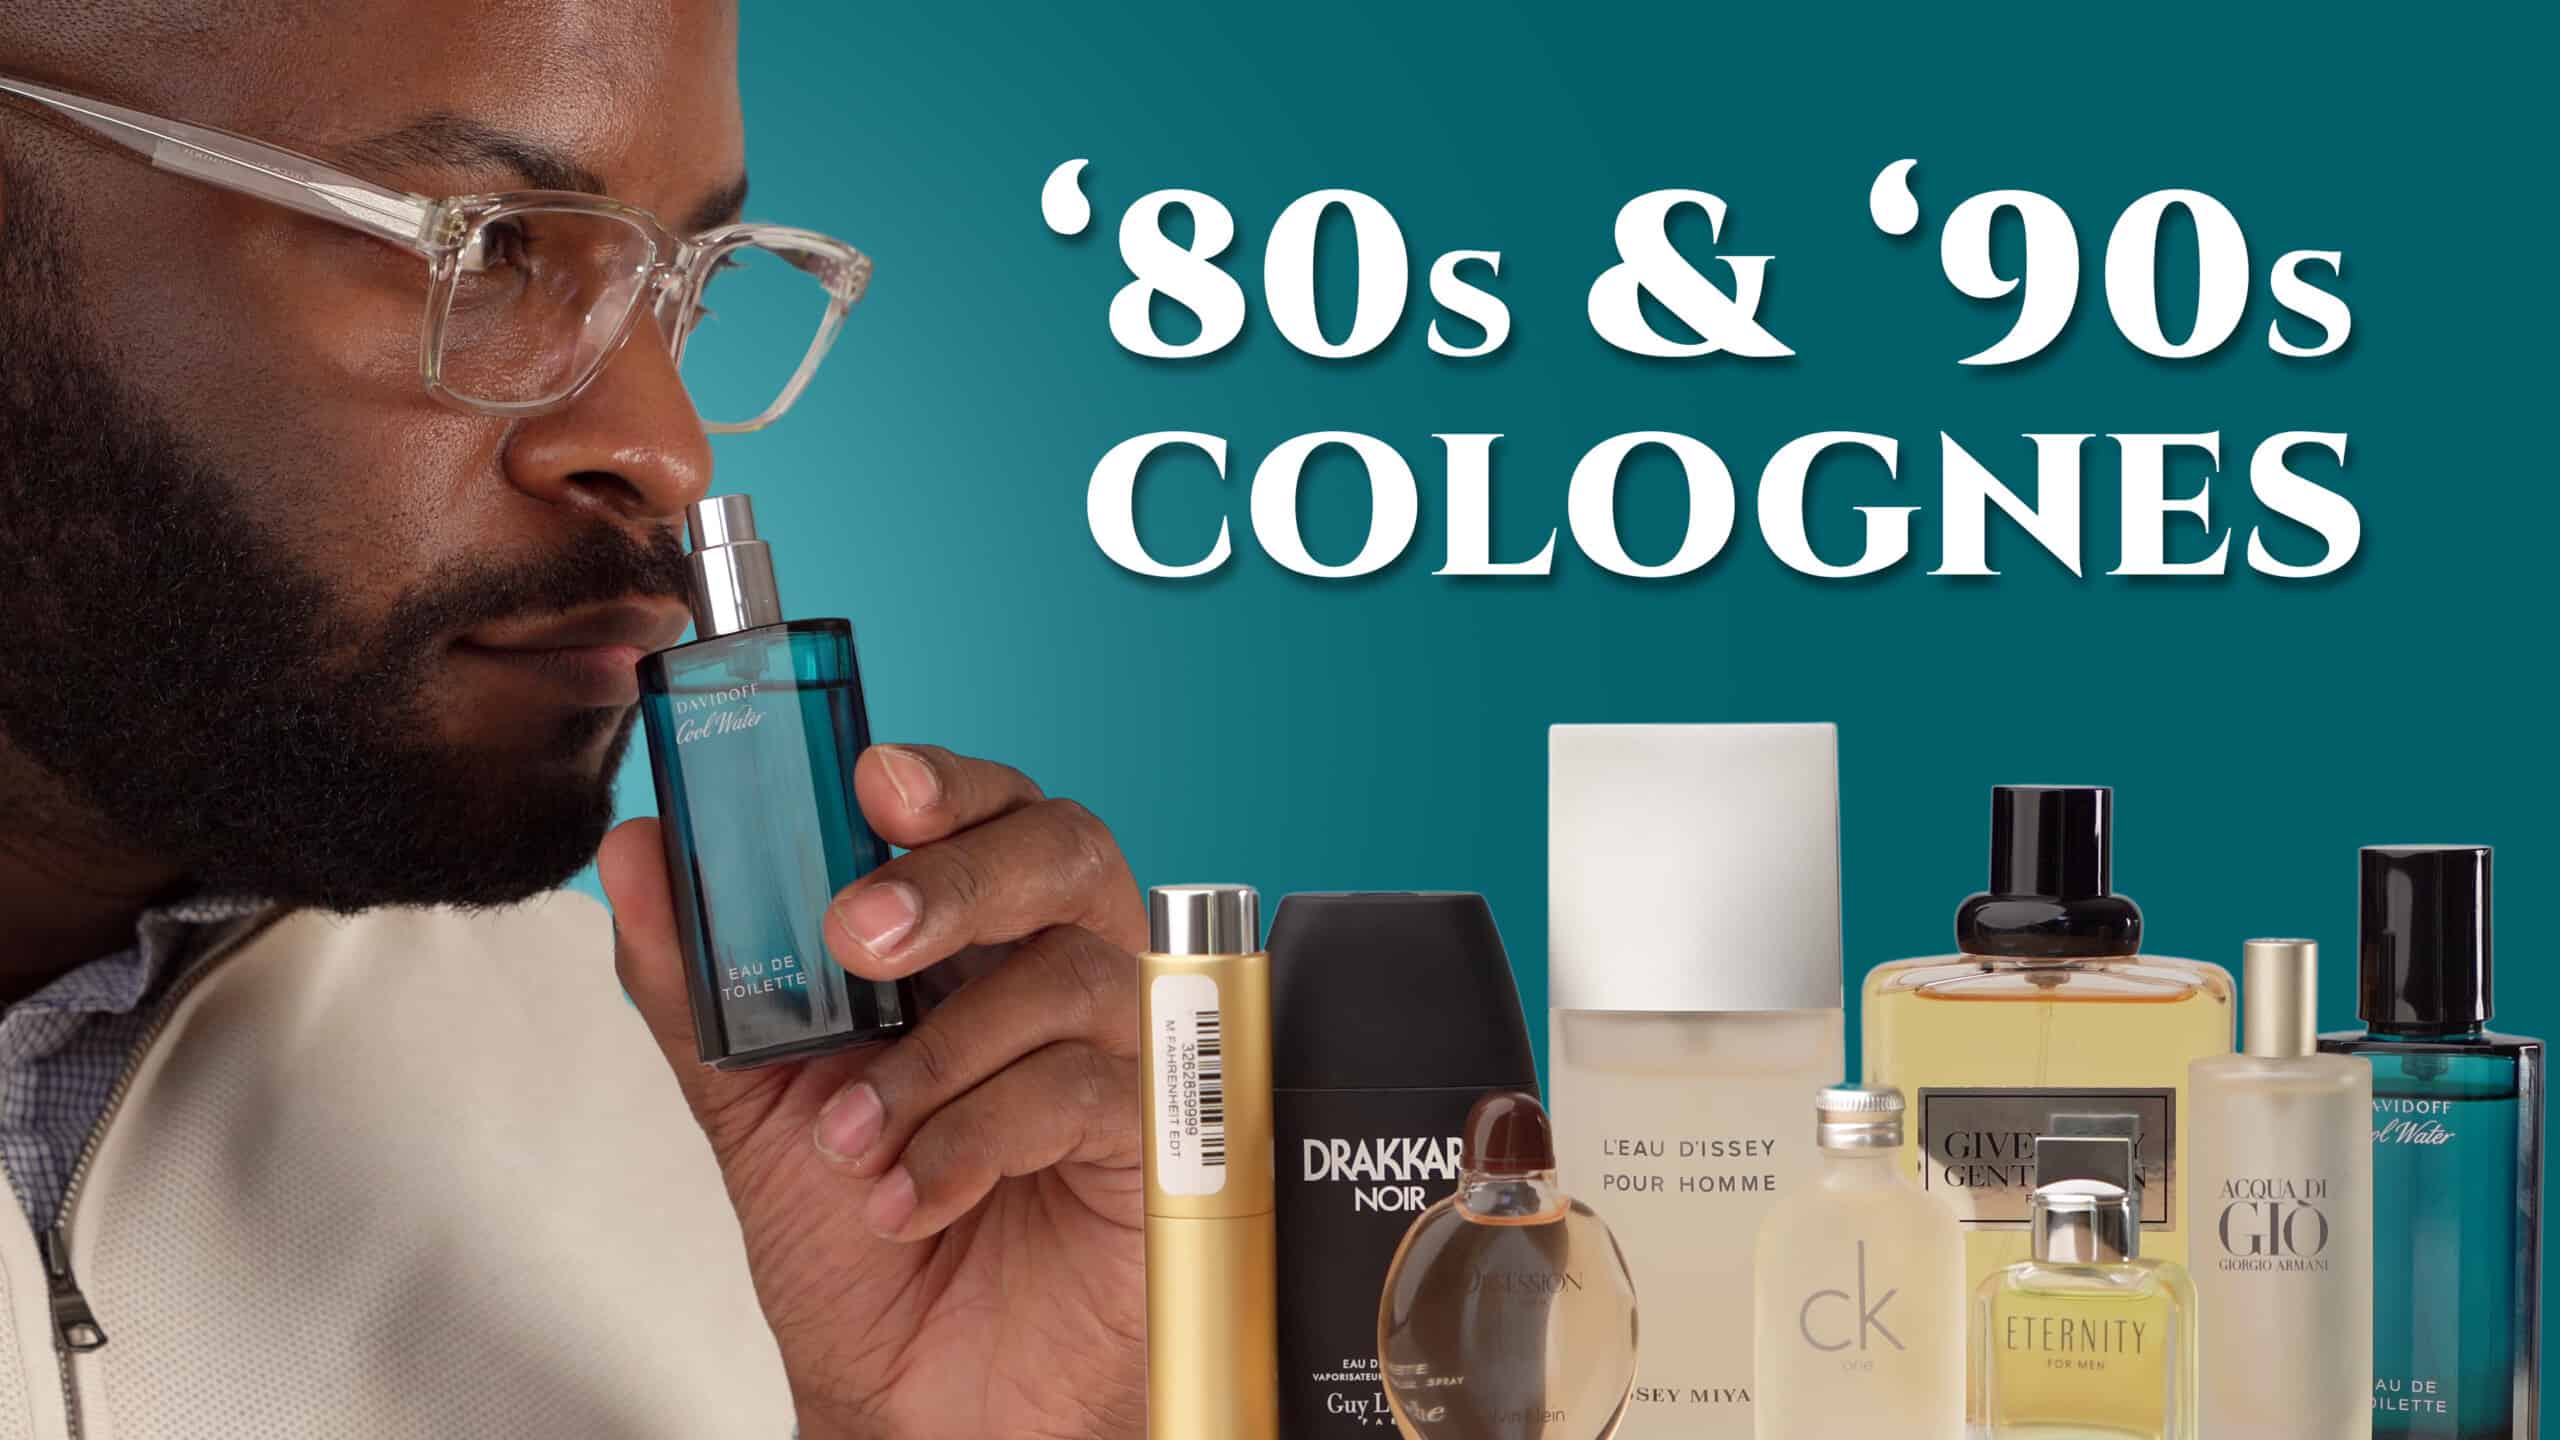 Polo Green Cologne Cheap: Unbeatable Deals for a Classic Scent